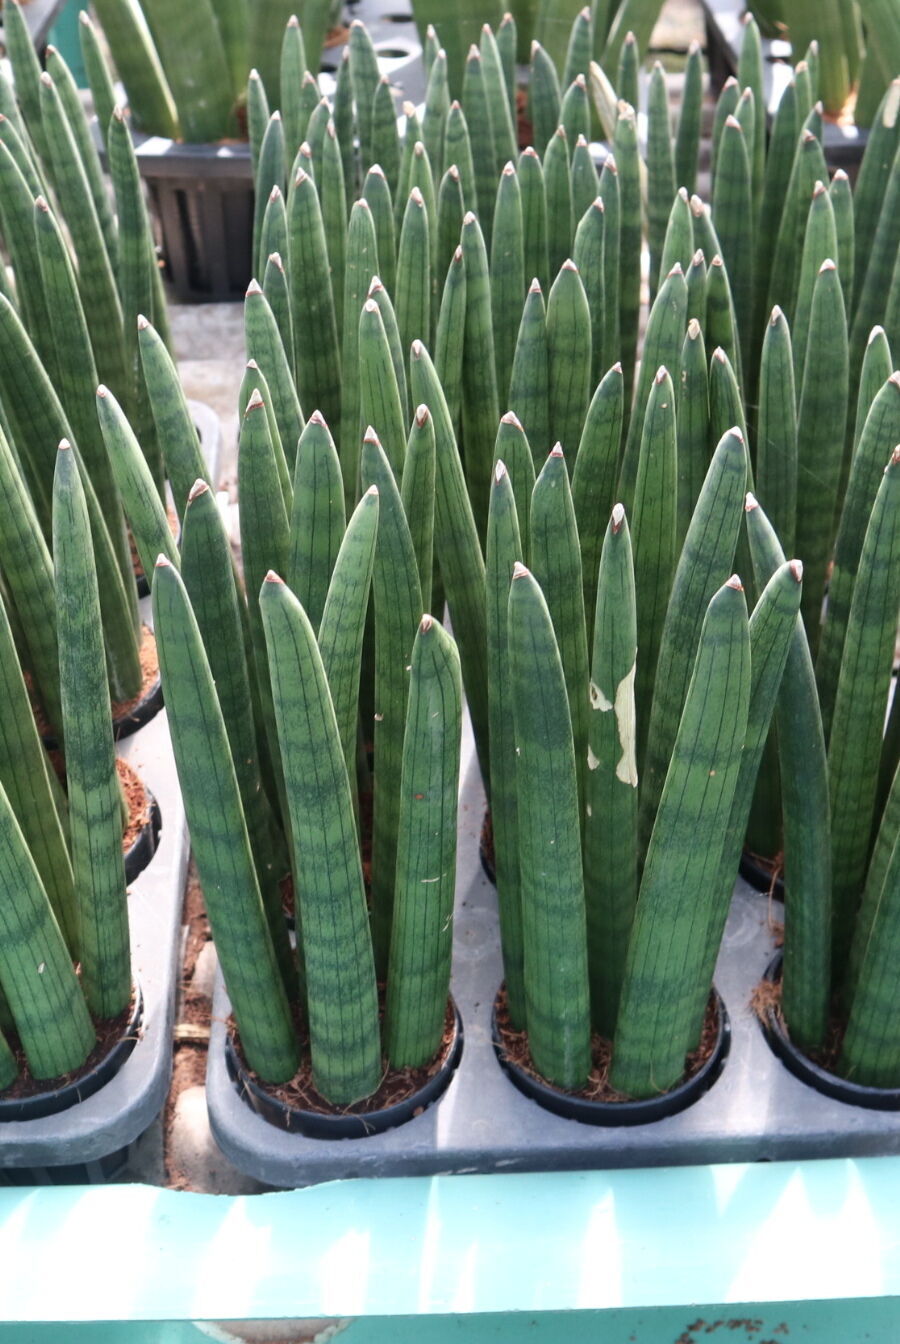 Thailand sansevieria cylindrica for sale Striaght shape 9 stems per one pot and 12 stems per on per one pot